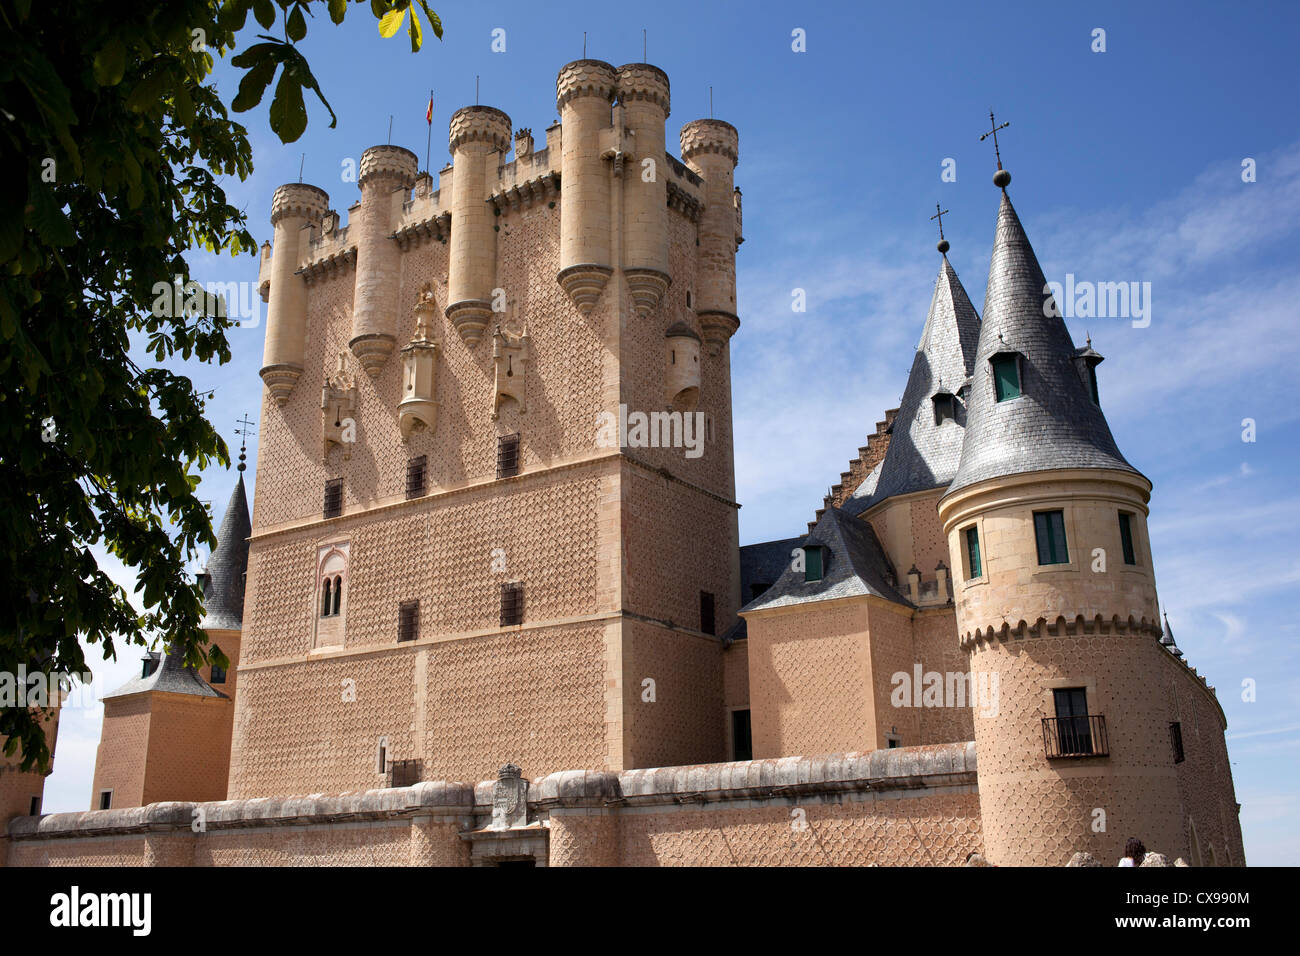 The fairytale Alcazar castle heavily restored in the 19th century after a fire. Stock Photo